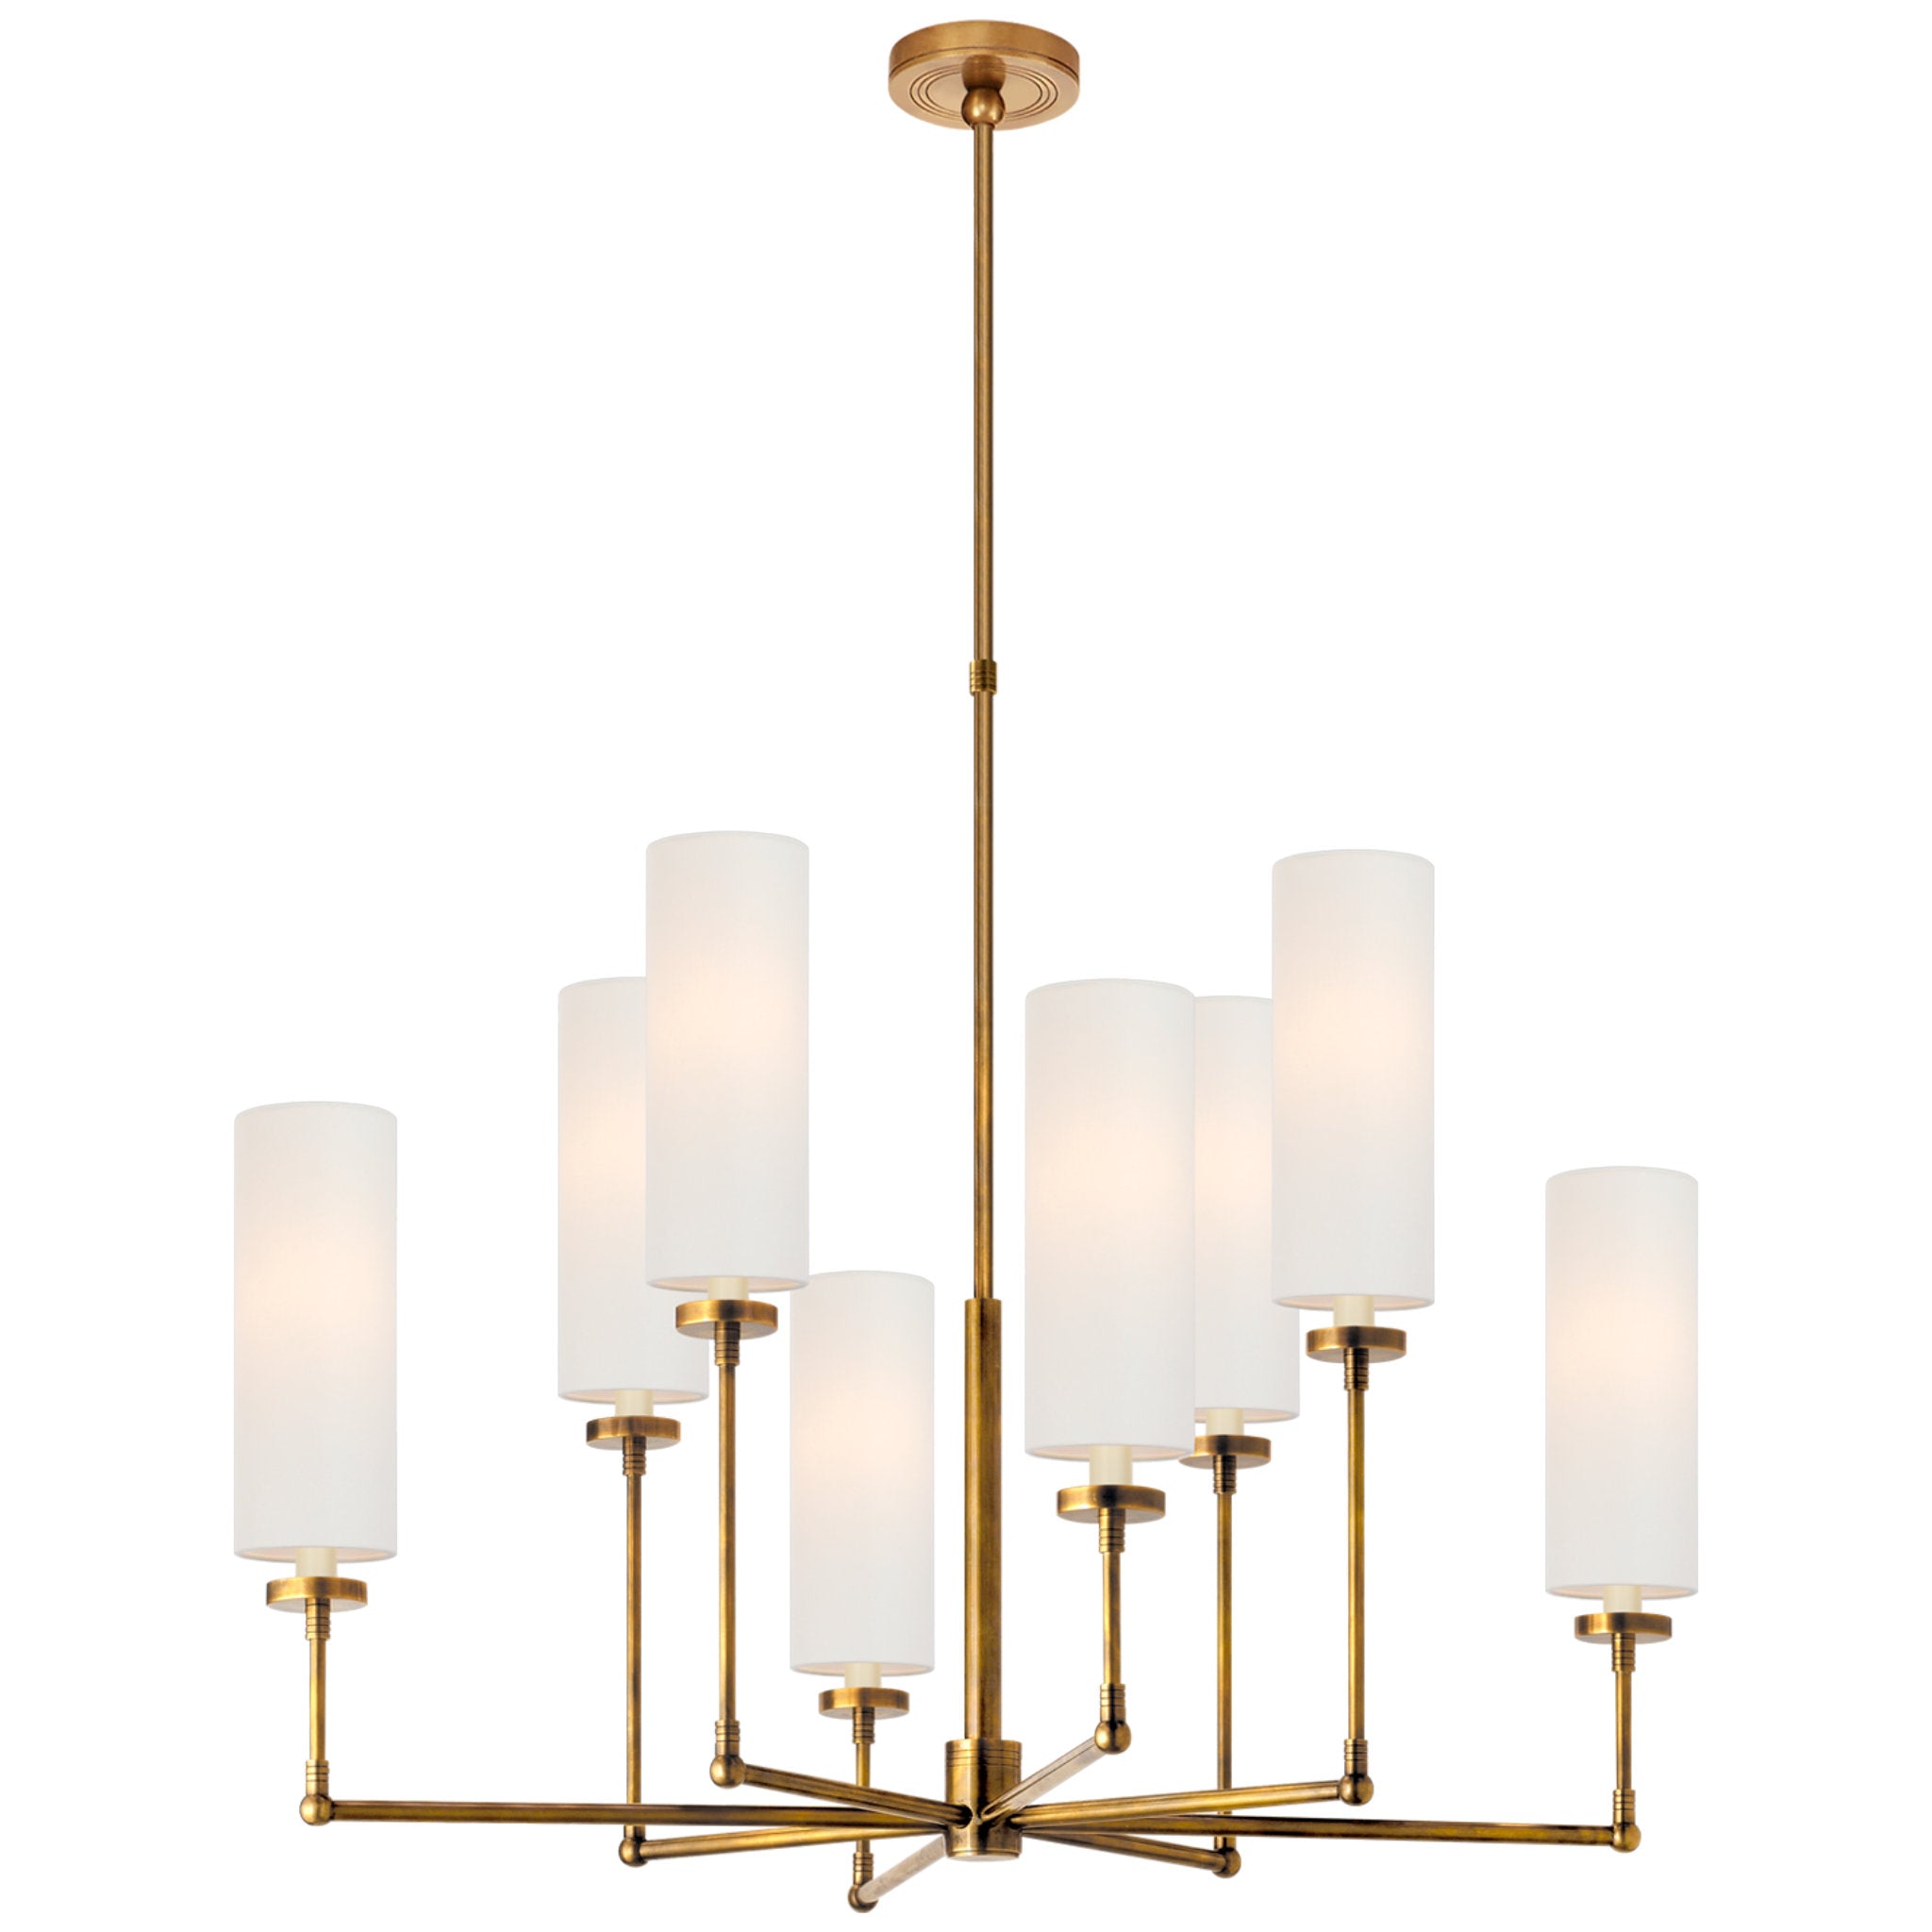 Thomas O'Brien Ziyi Large Chandelier in Hand-Rubbed Antique Brass with